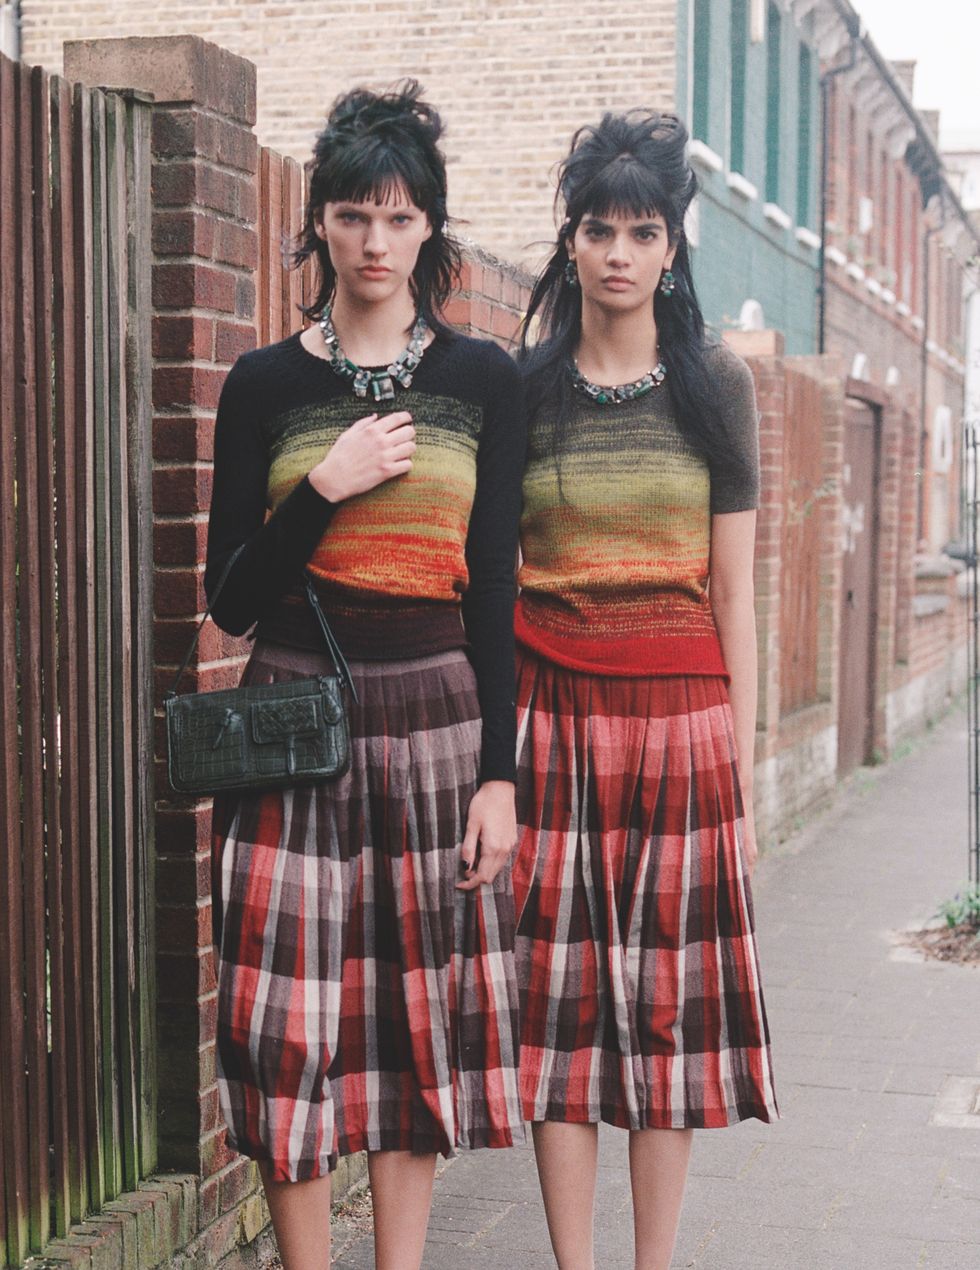 two models standing together in identical outfits and with the same hairstyles